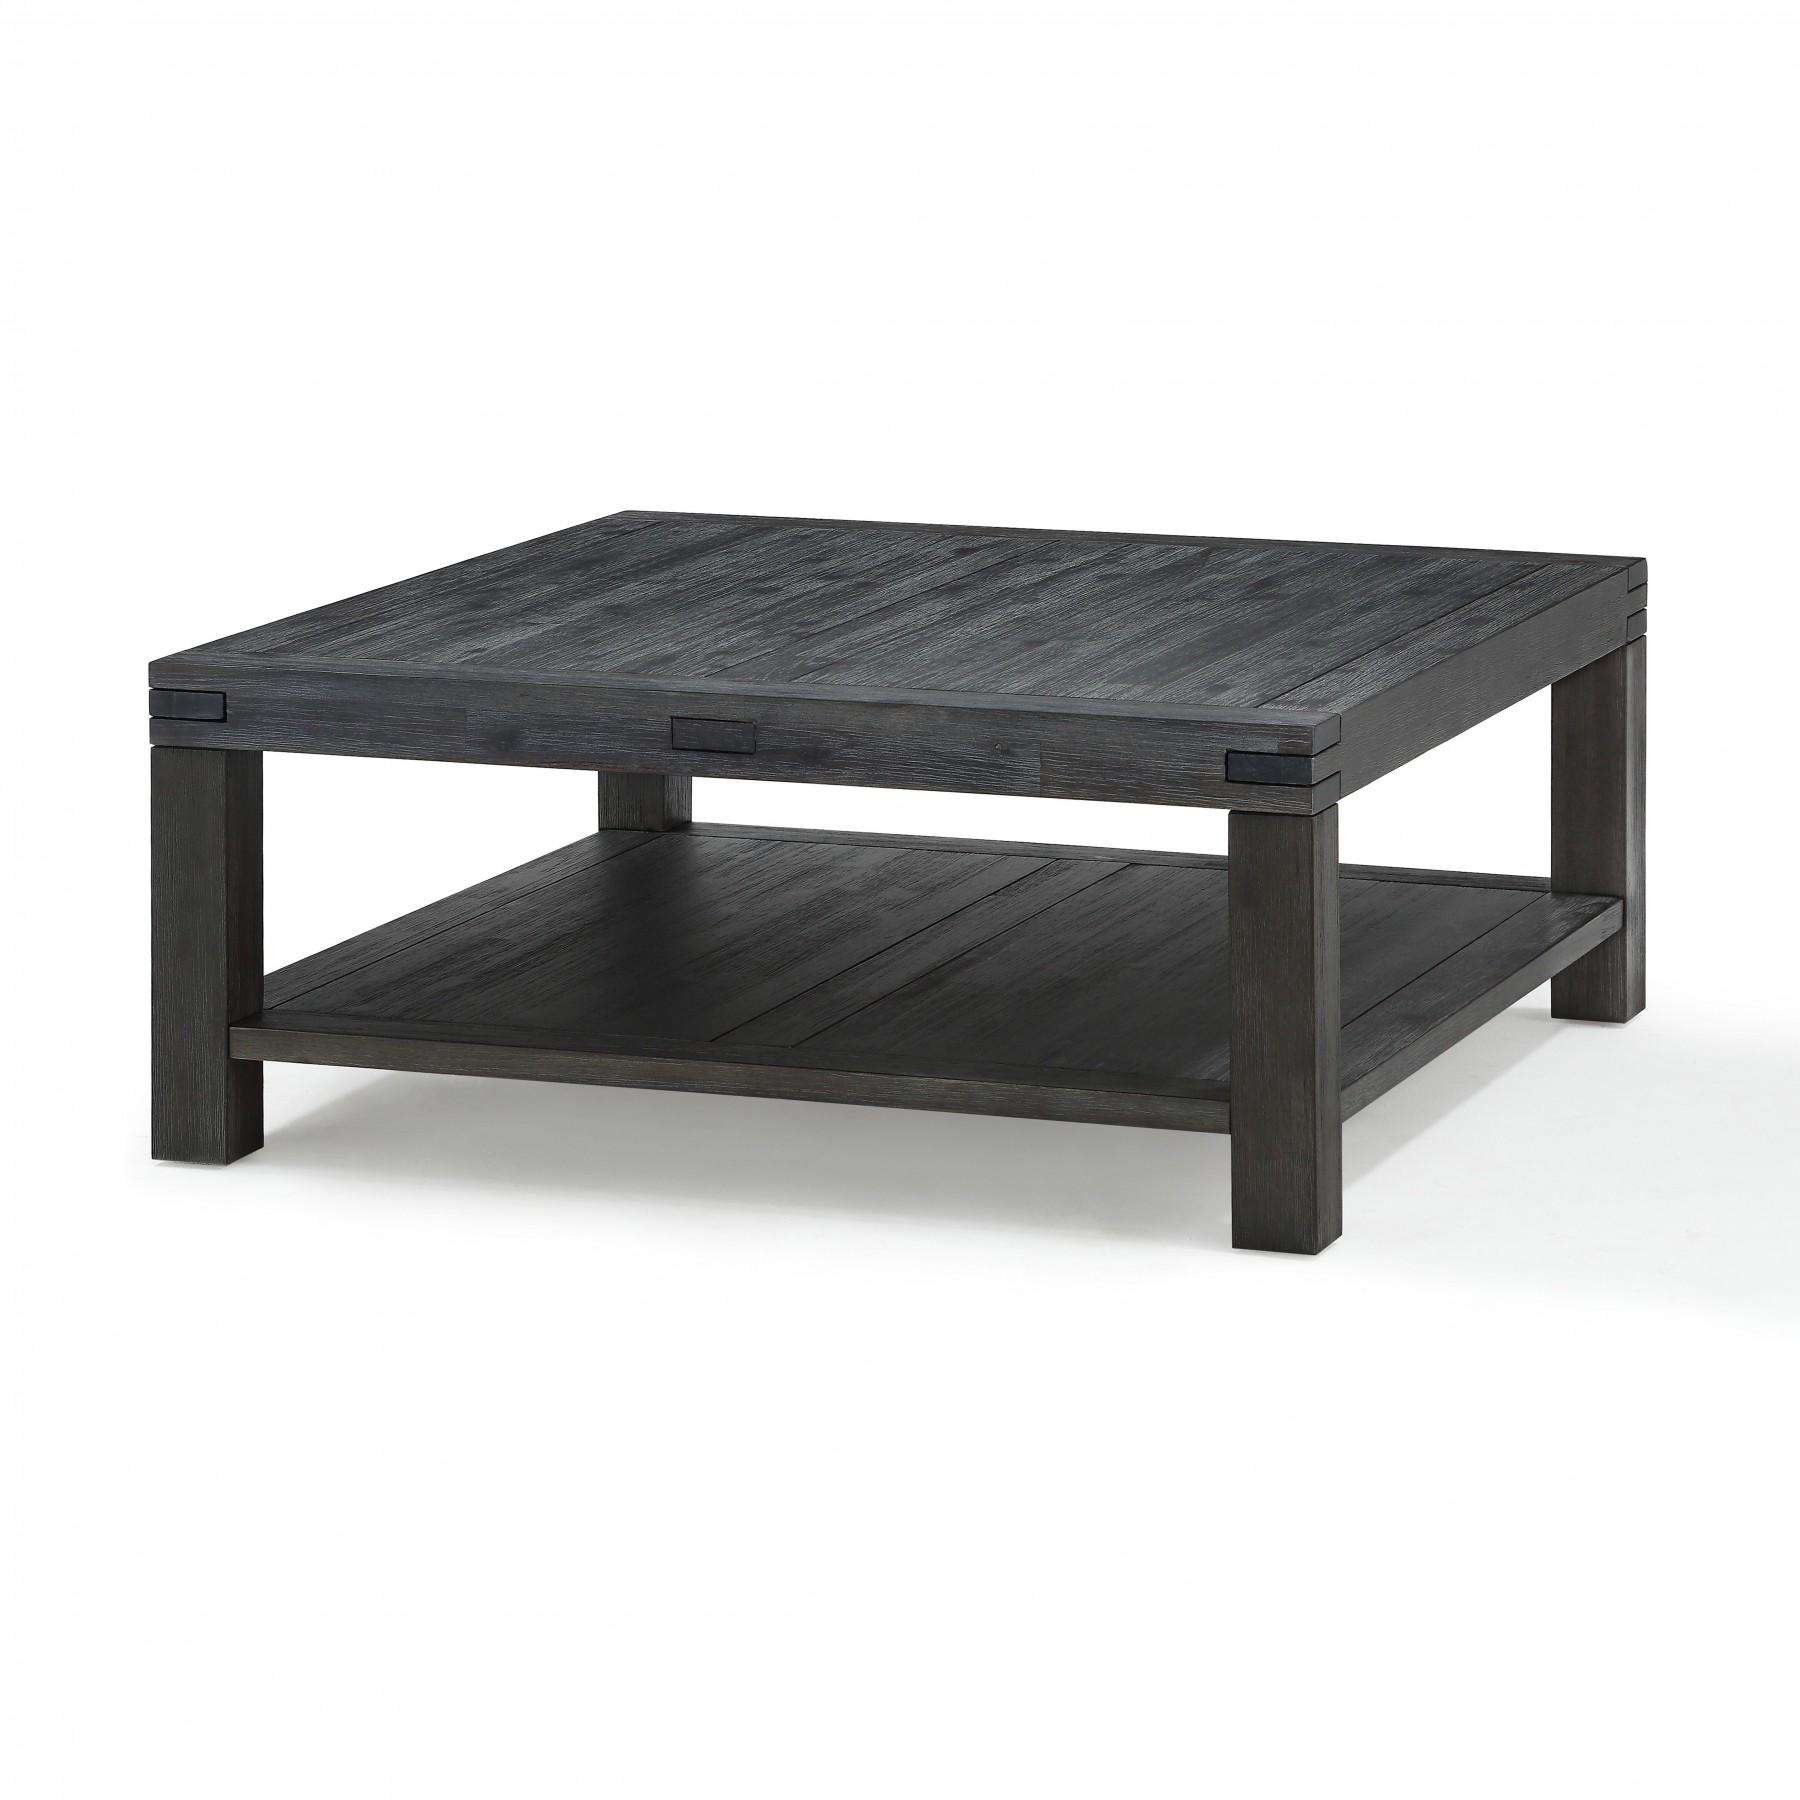 Rustic Coffee Table MEADOW 3FT321 in Graphite 